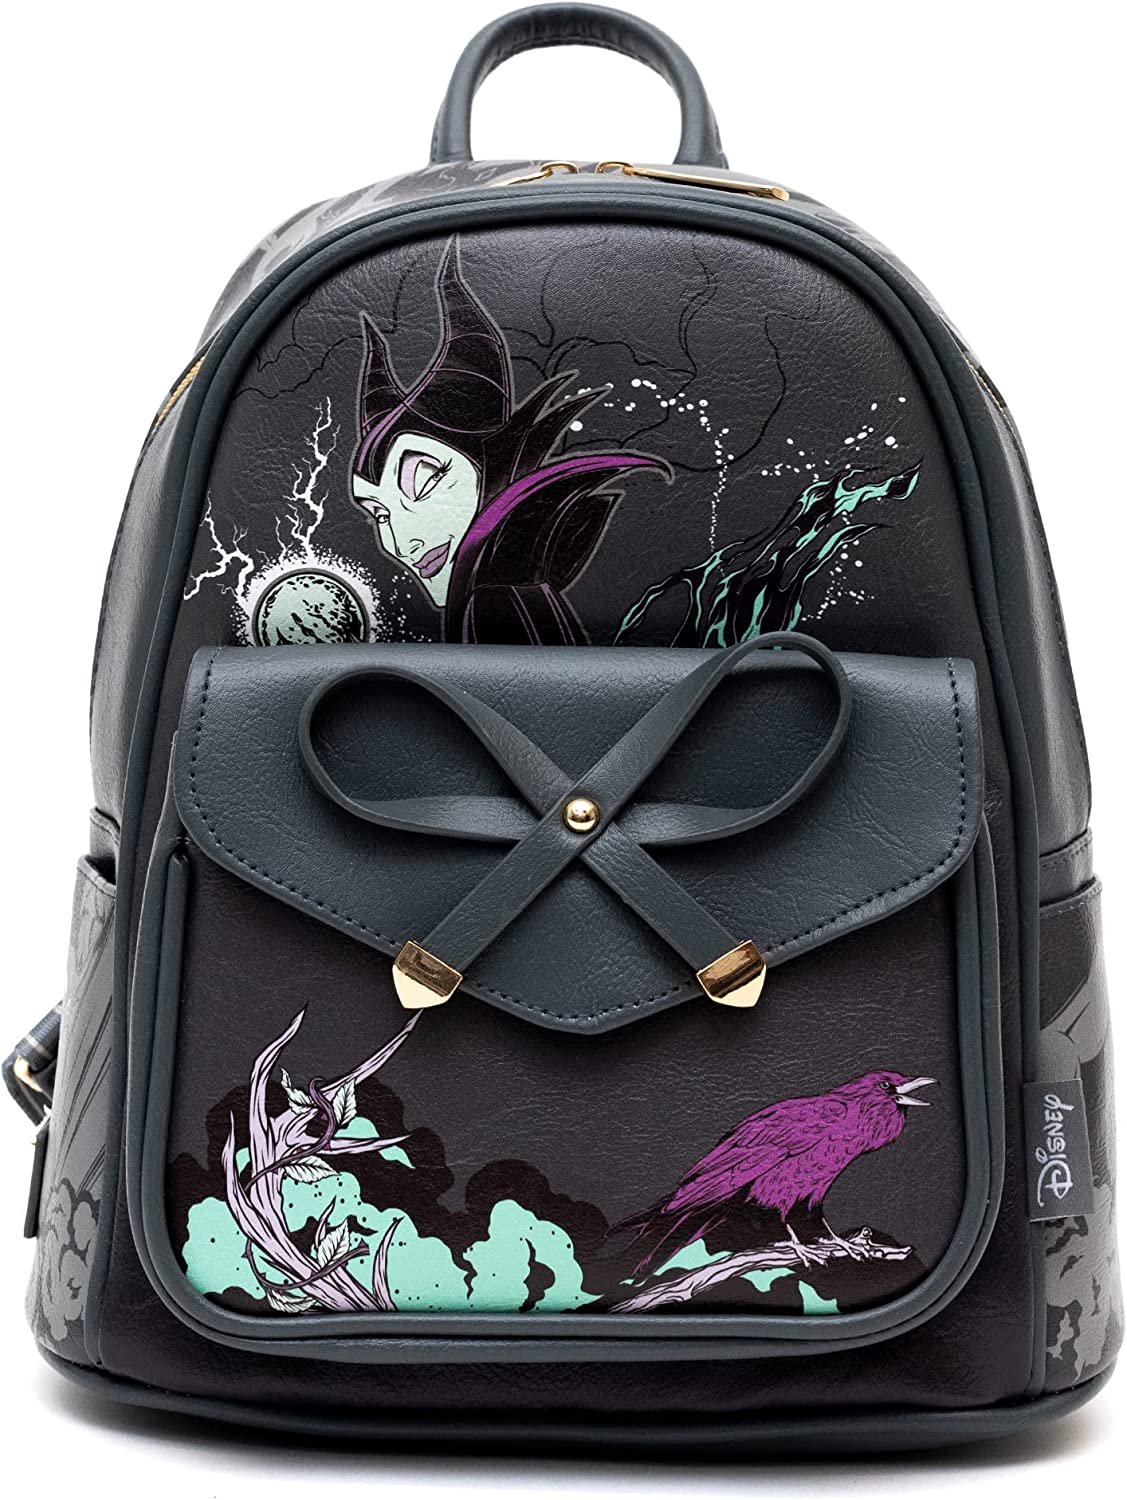 Loungefly Maleficent Dragon Mini Backpack Glow in the Dark Flames